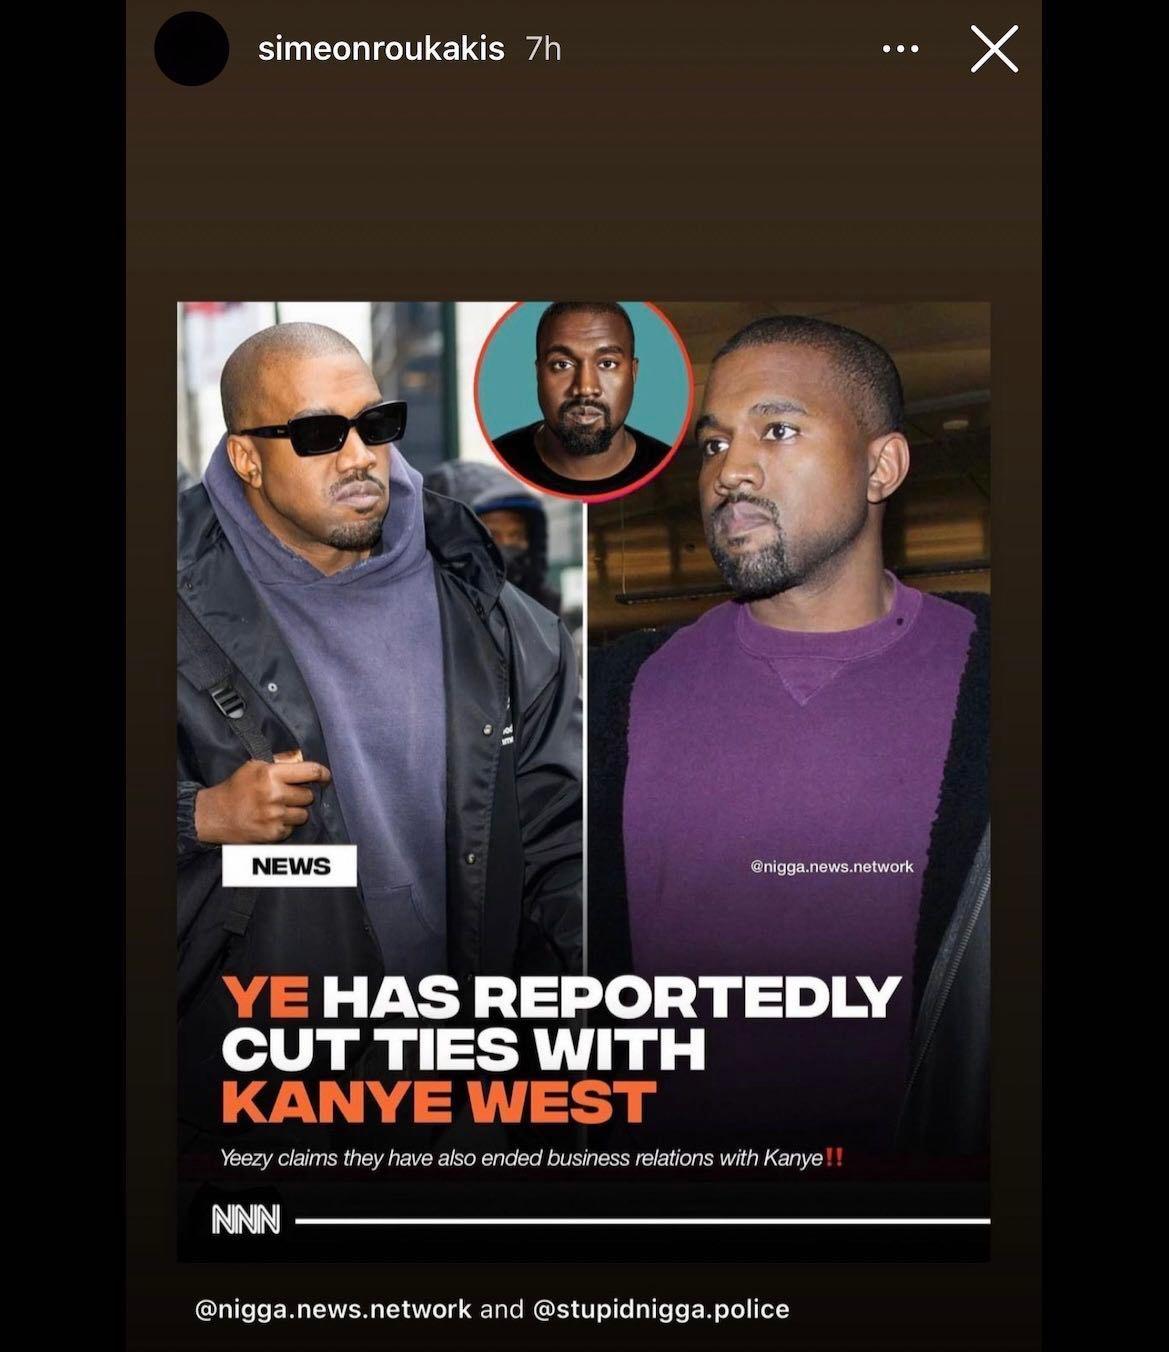 Kanye West latest Instagram post pokes fun at dropped deals